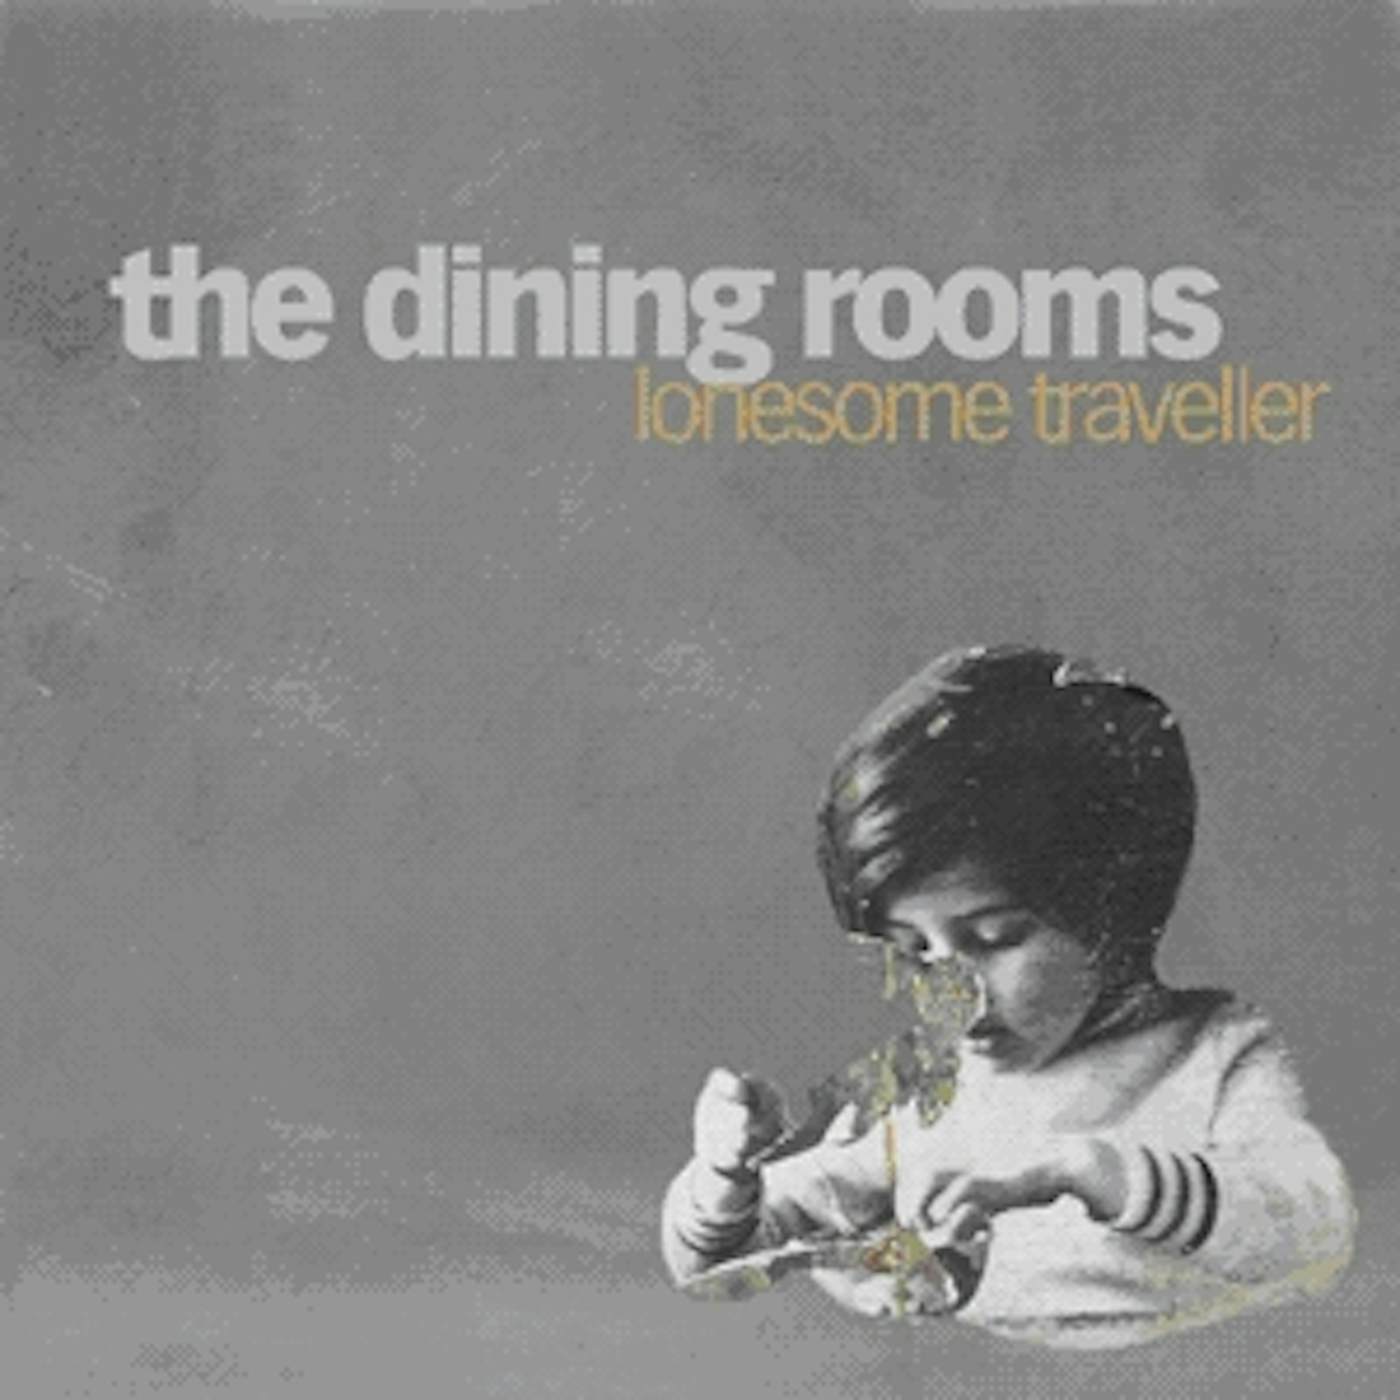 The Dining Rooms LONESOME TRAVELER CD